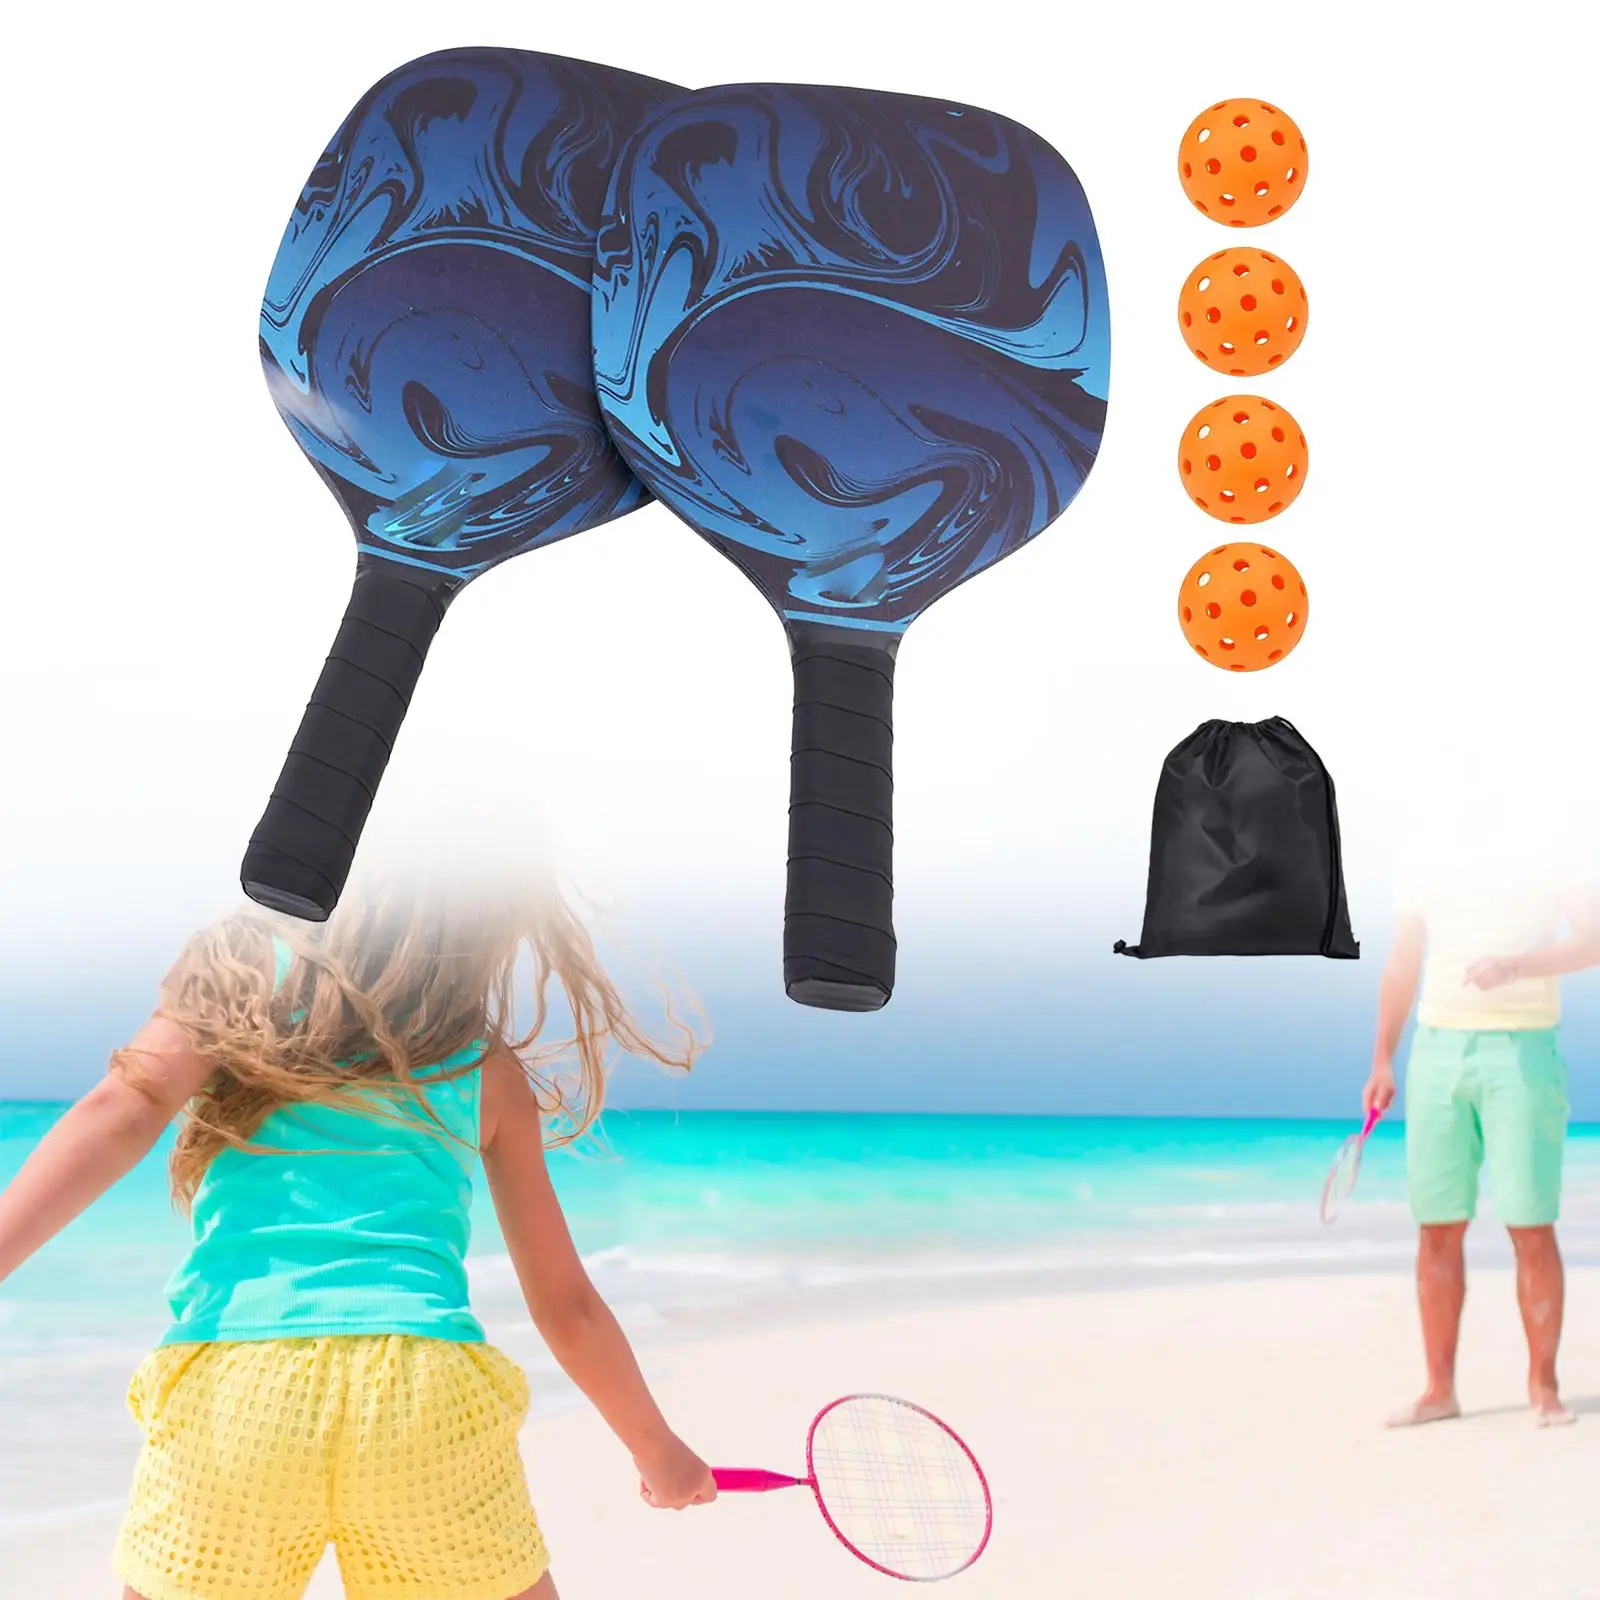 Pickleball Paddles Set Wooden Storage Bag and 4 Balls for Beach or Park